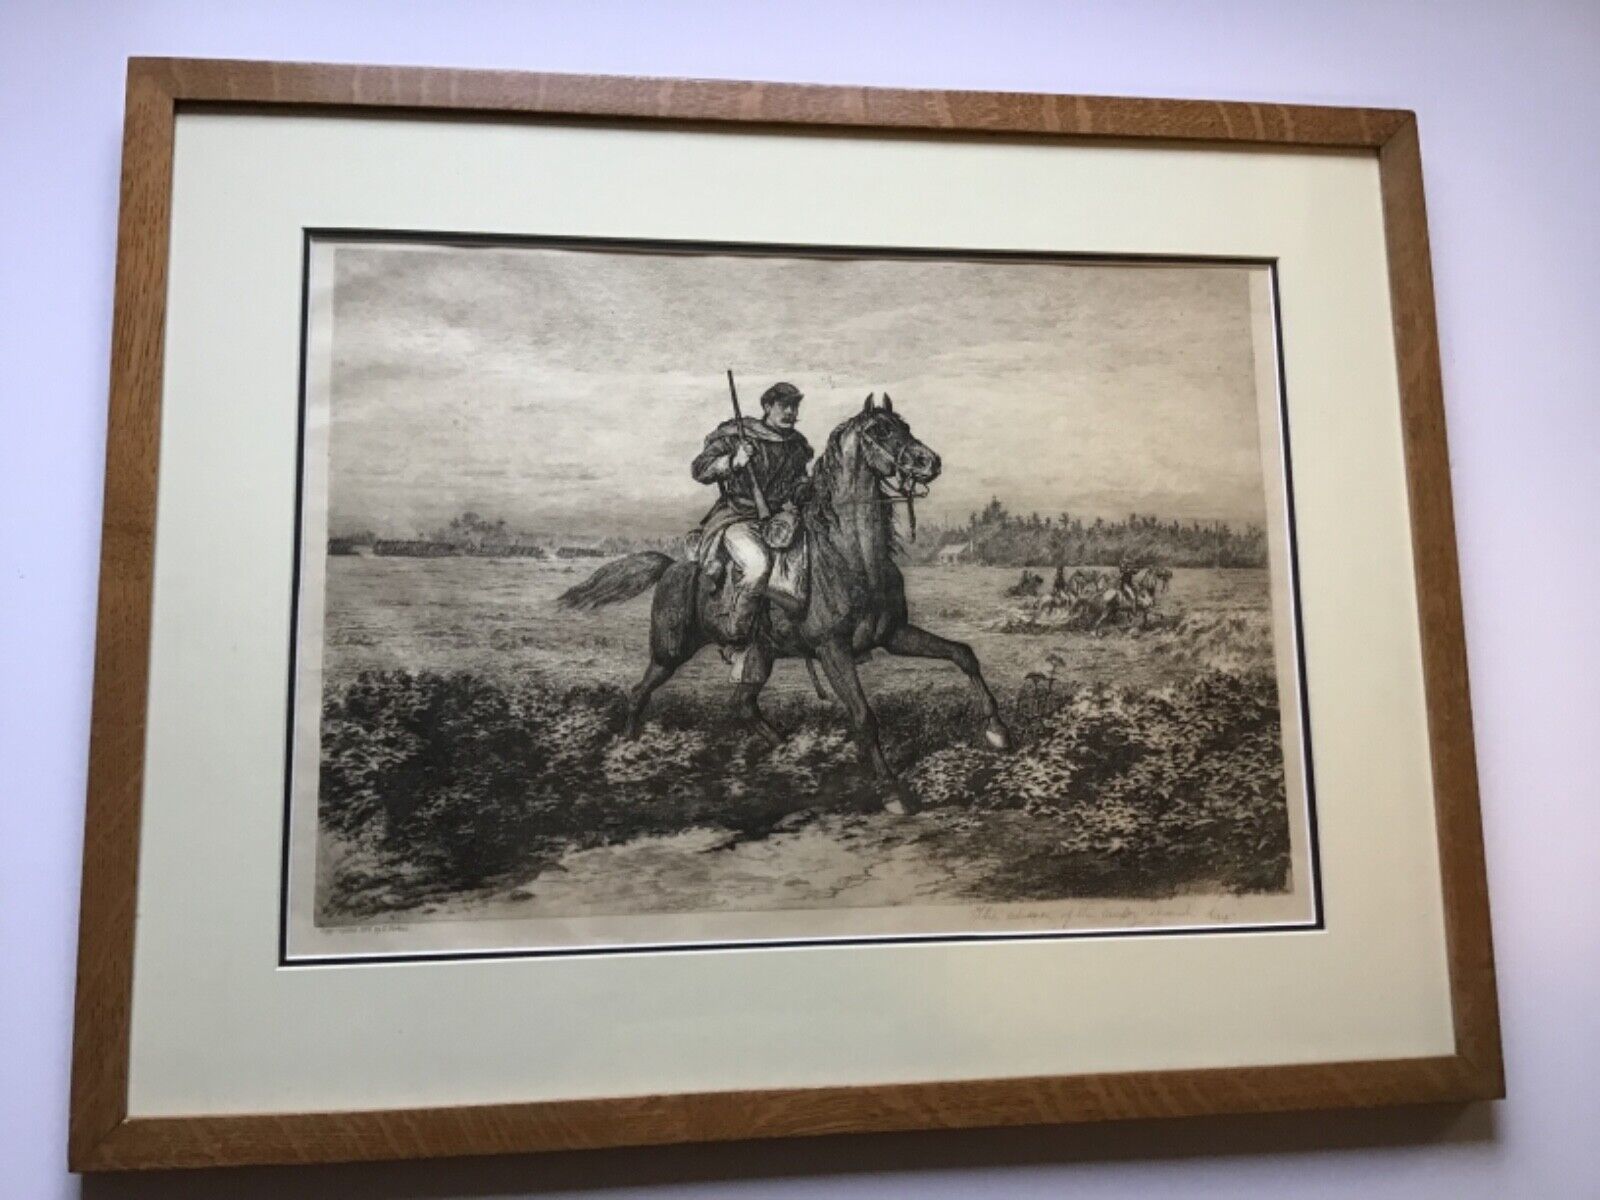 Edwin Forbes Etching “The Advance Of The Cavalry” 1876 Great Frame